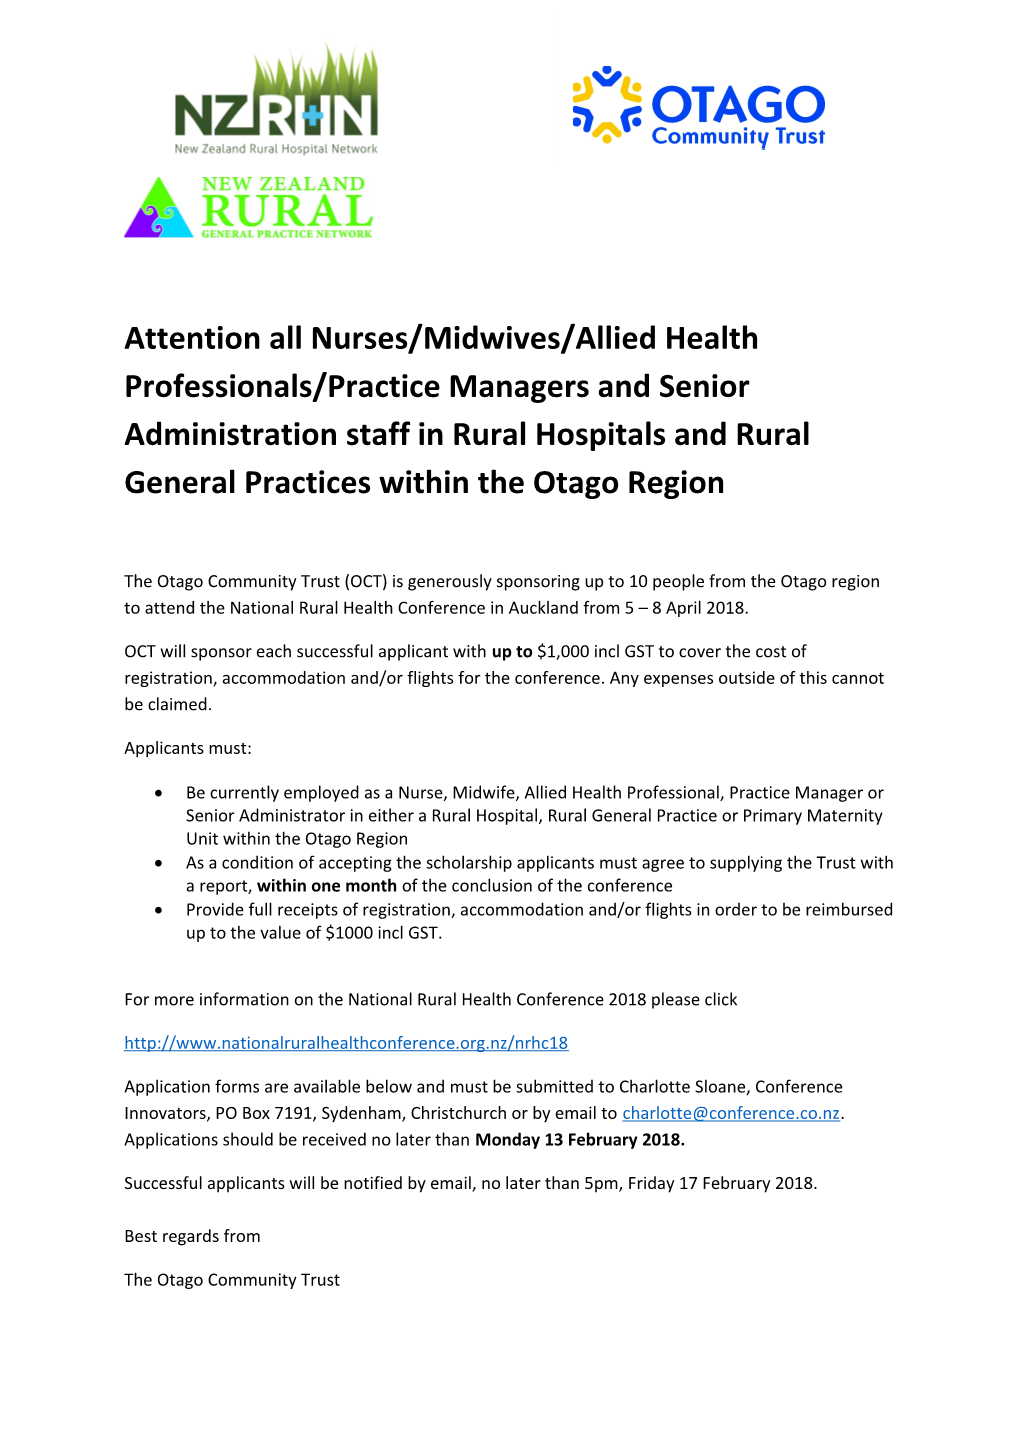 Kaipara Project Nurse Group Rural Retention Fund Application Form for Nurses Who Are Working